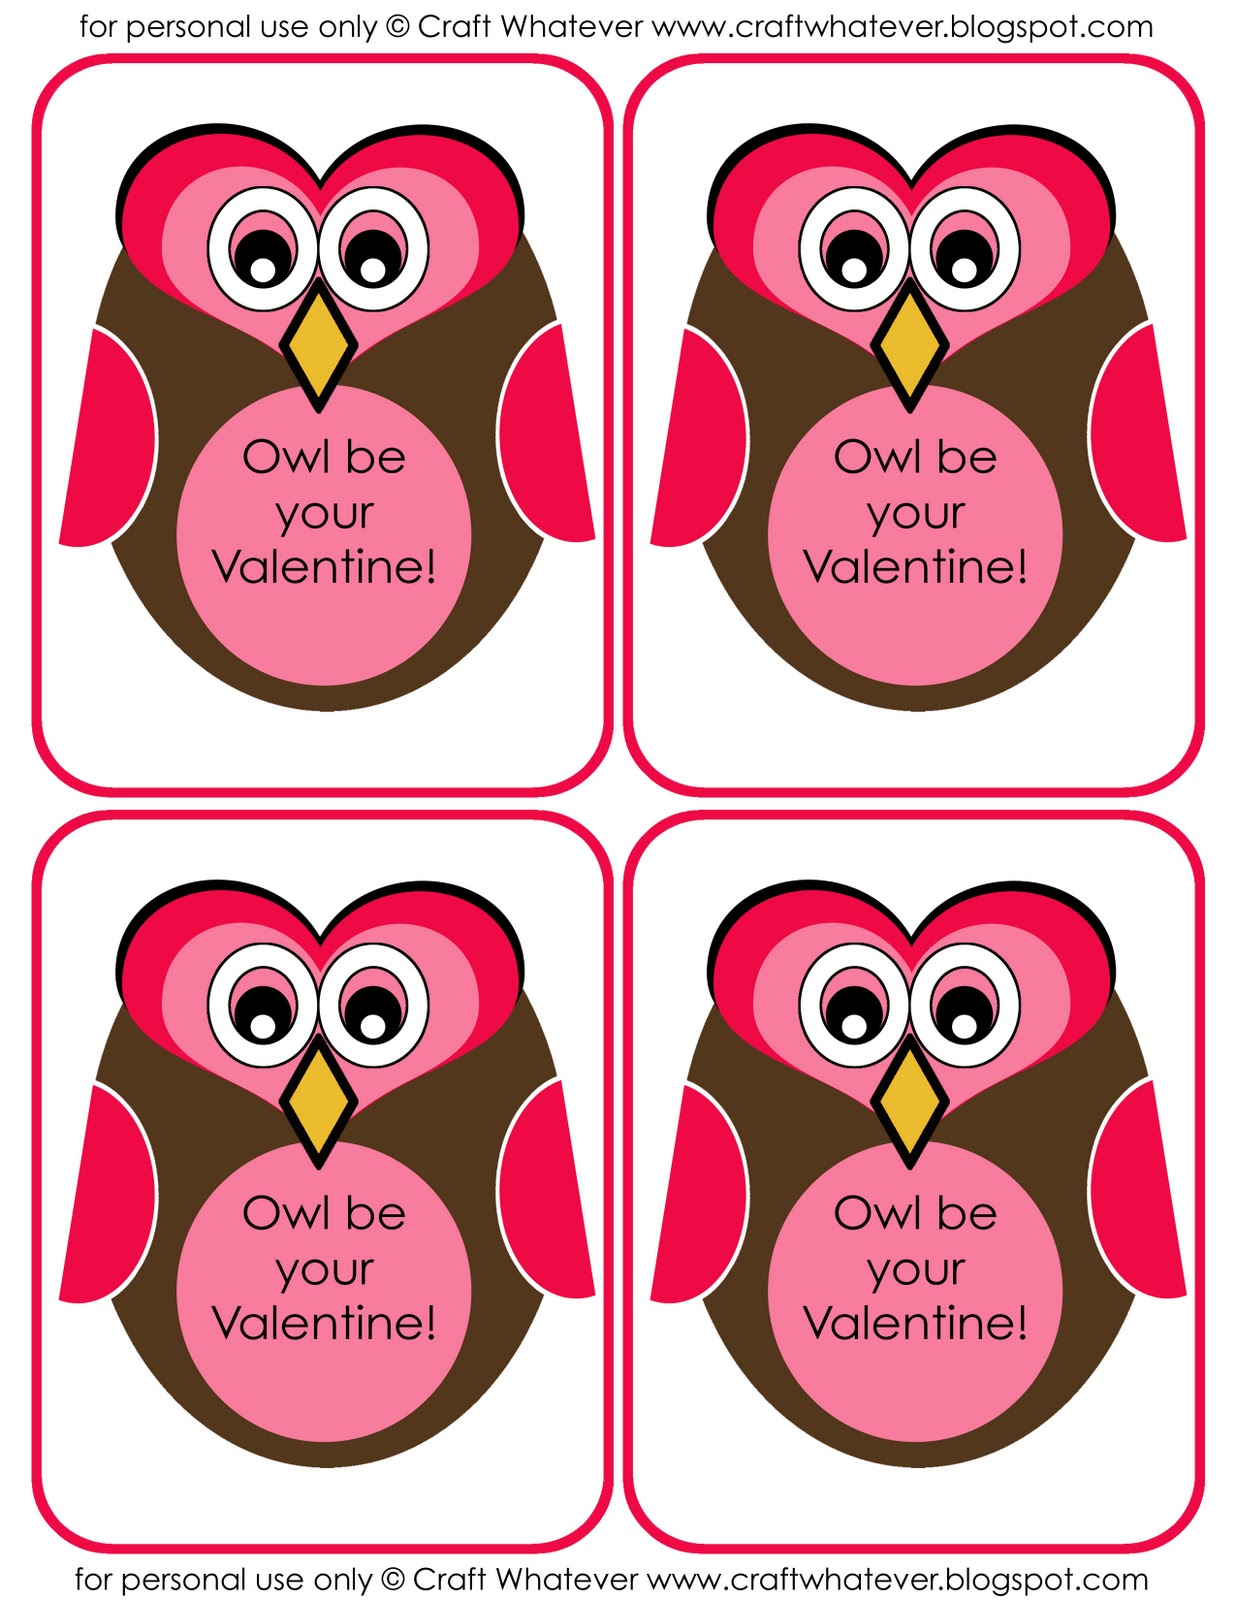 Craft Whatever Free Valentine s Day Printables